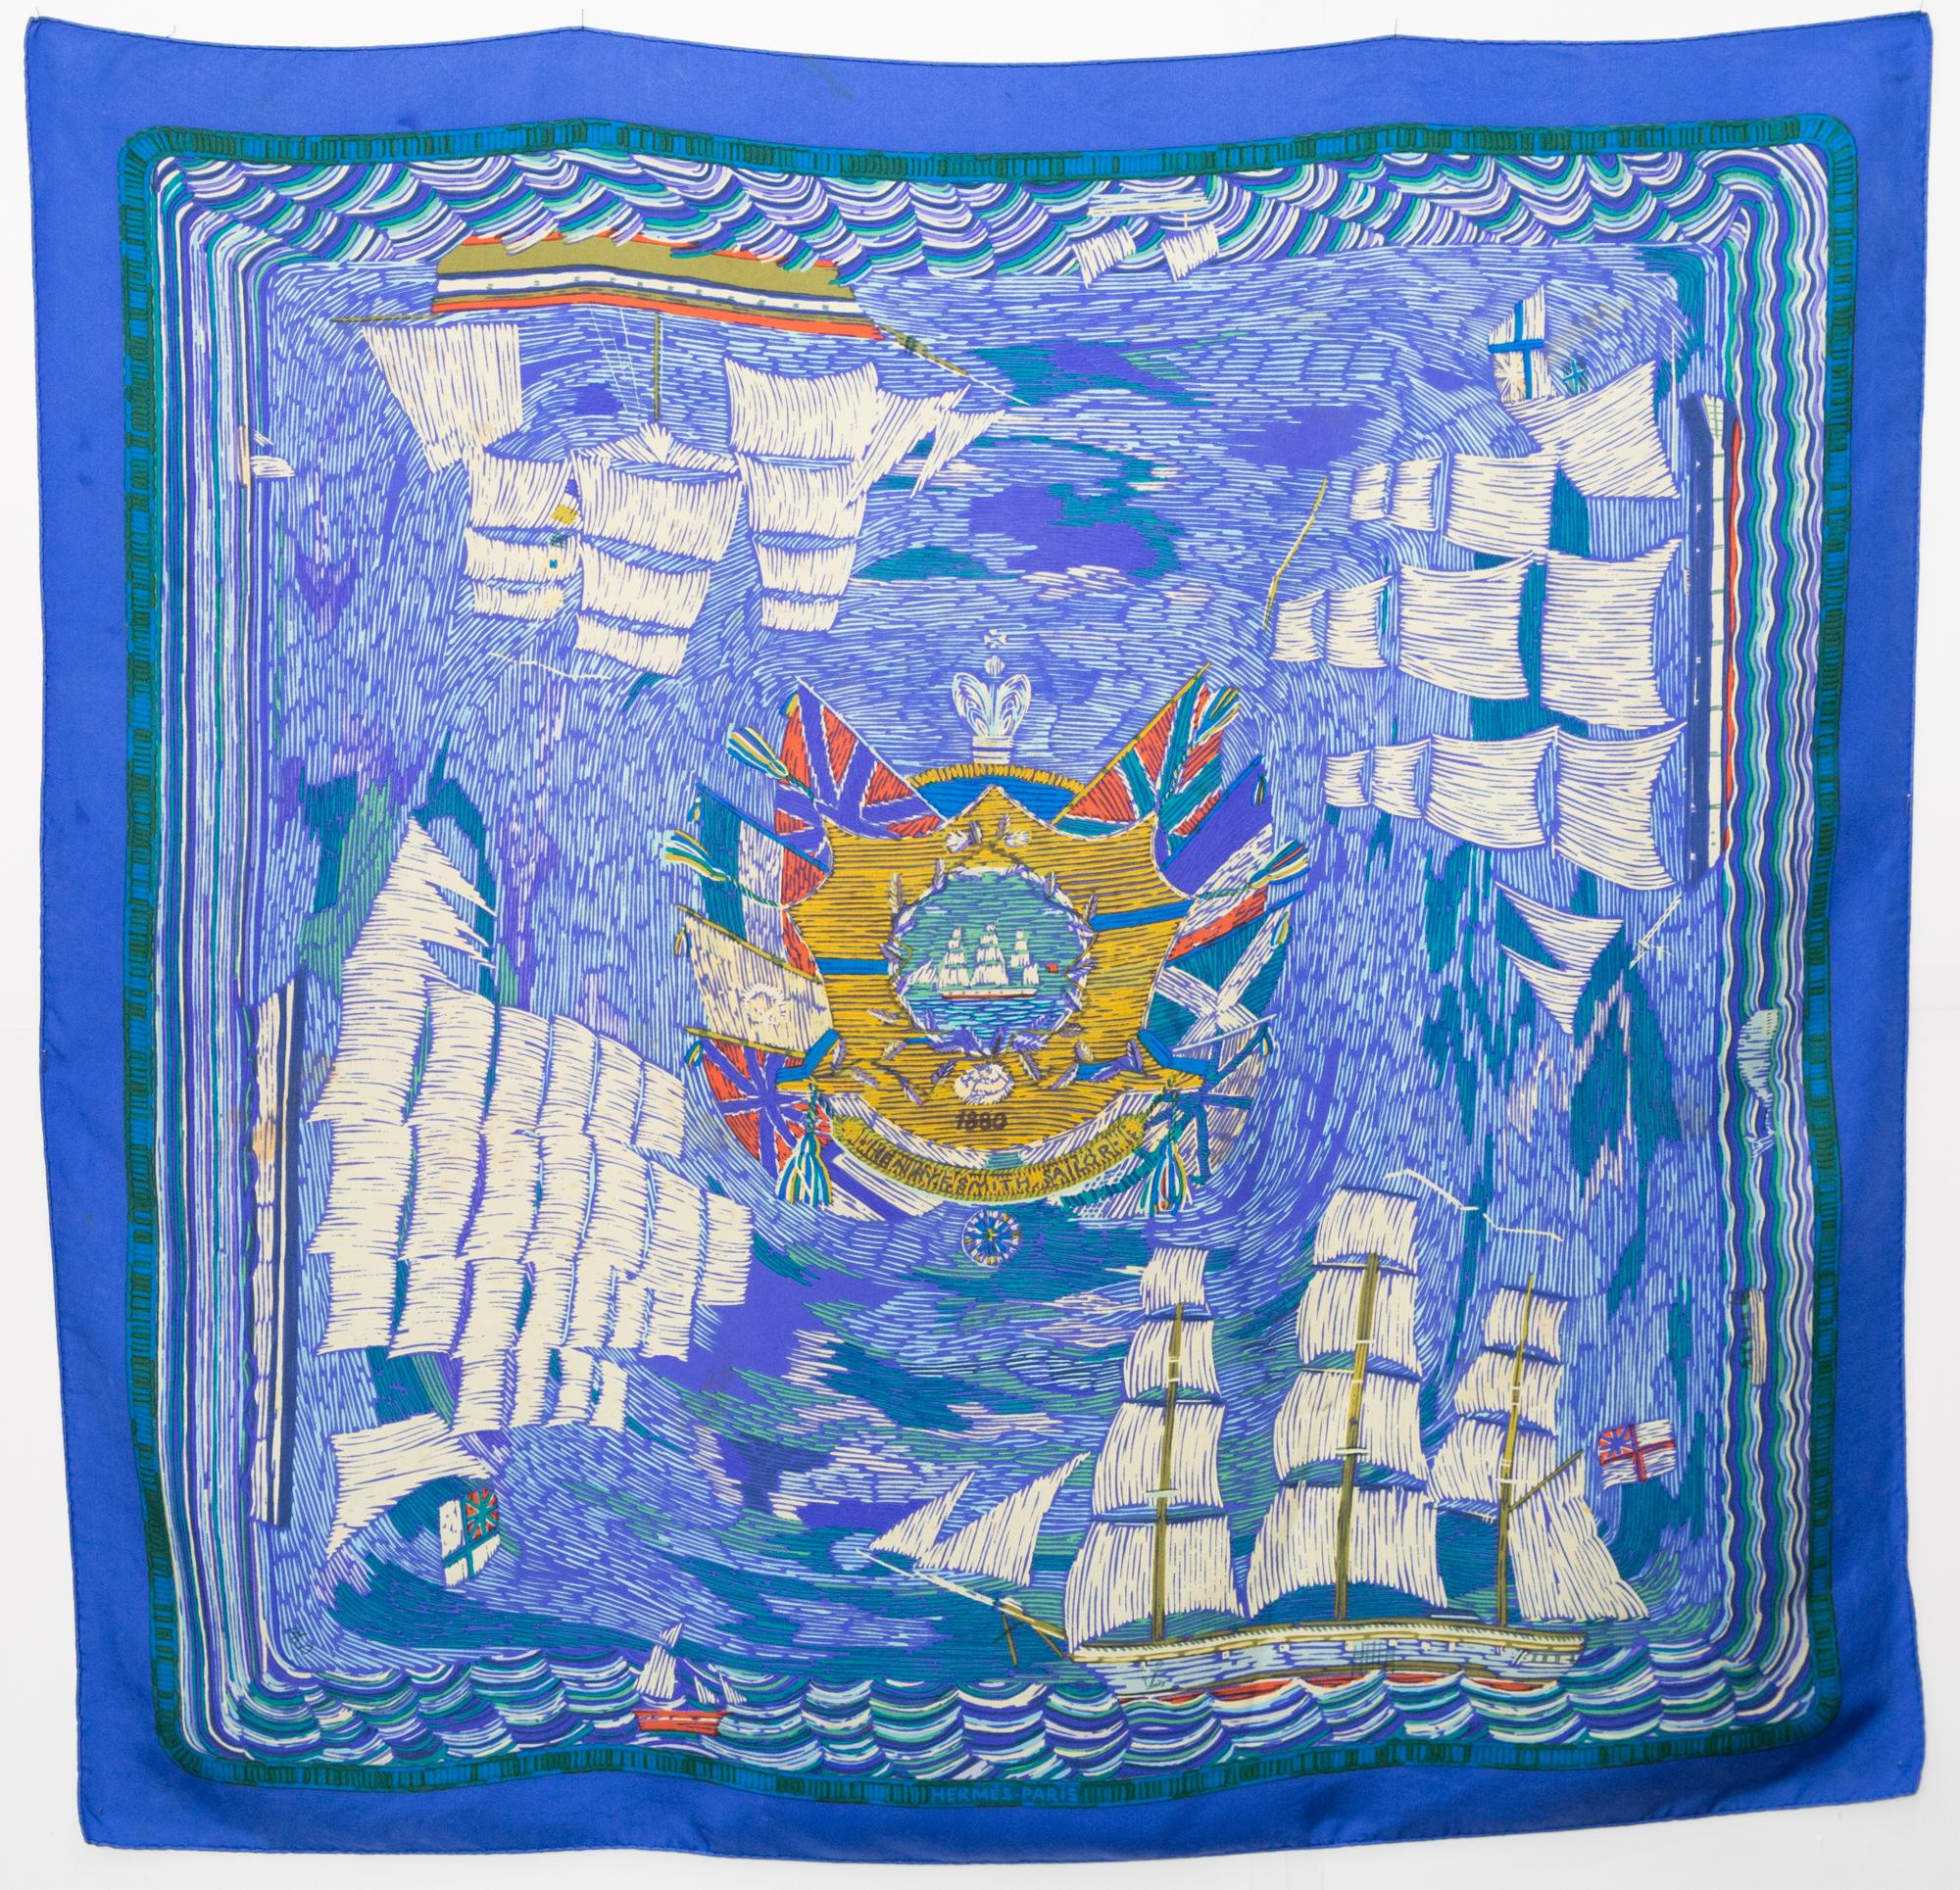 Women's or Men's Hermes Marine Naive 1880 Henry-F Smith Sailor by P Dumas Silk Scarf For Sale